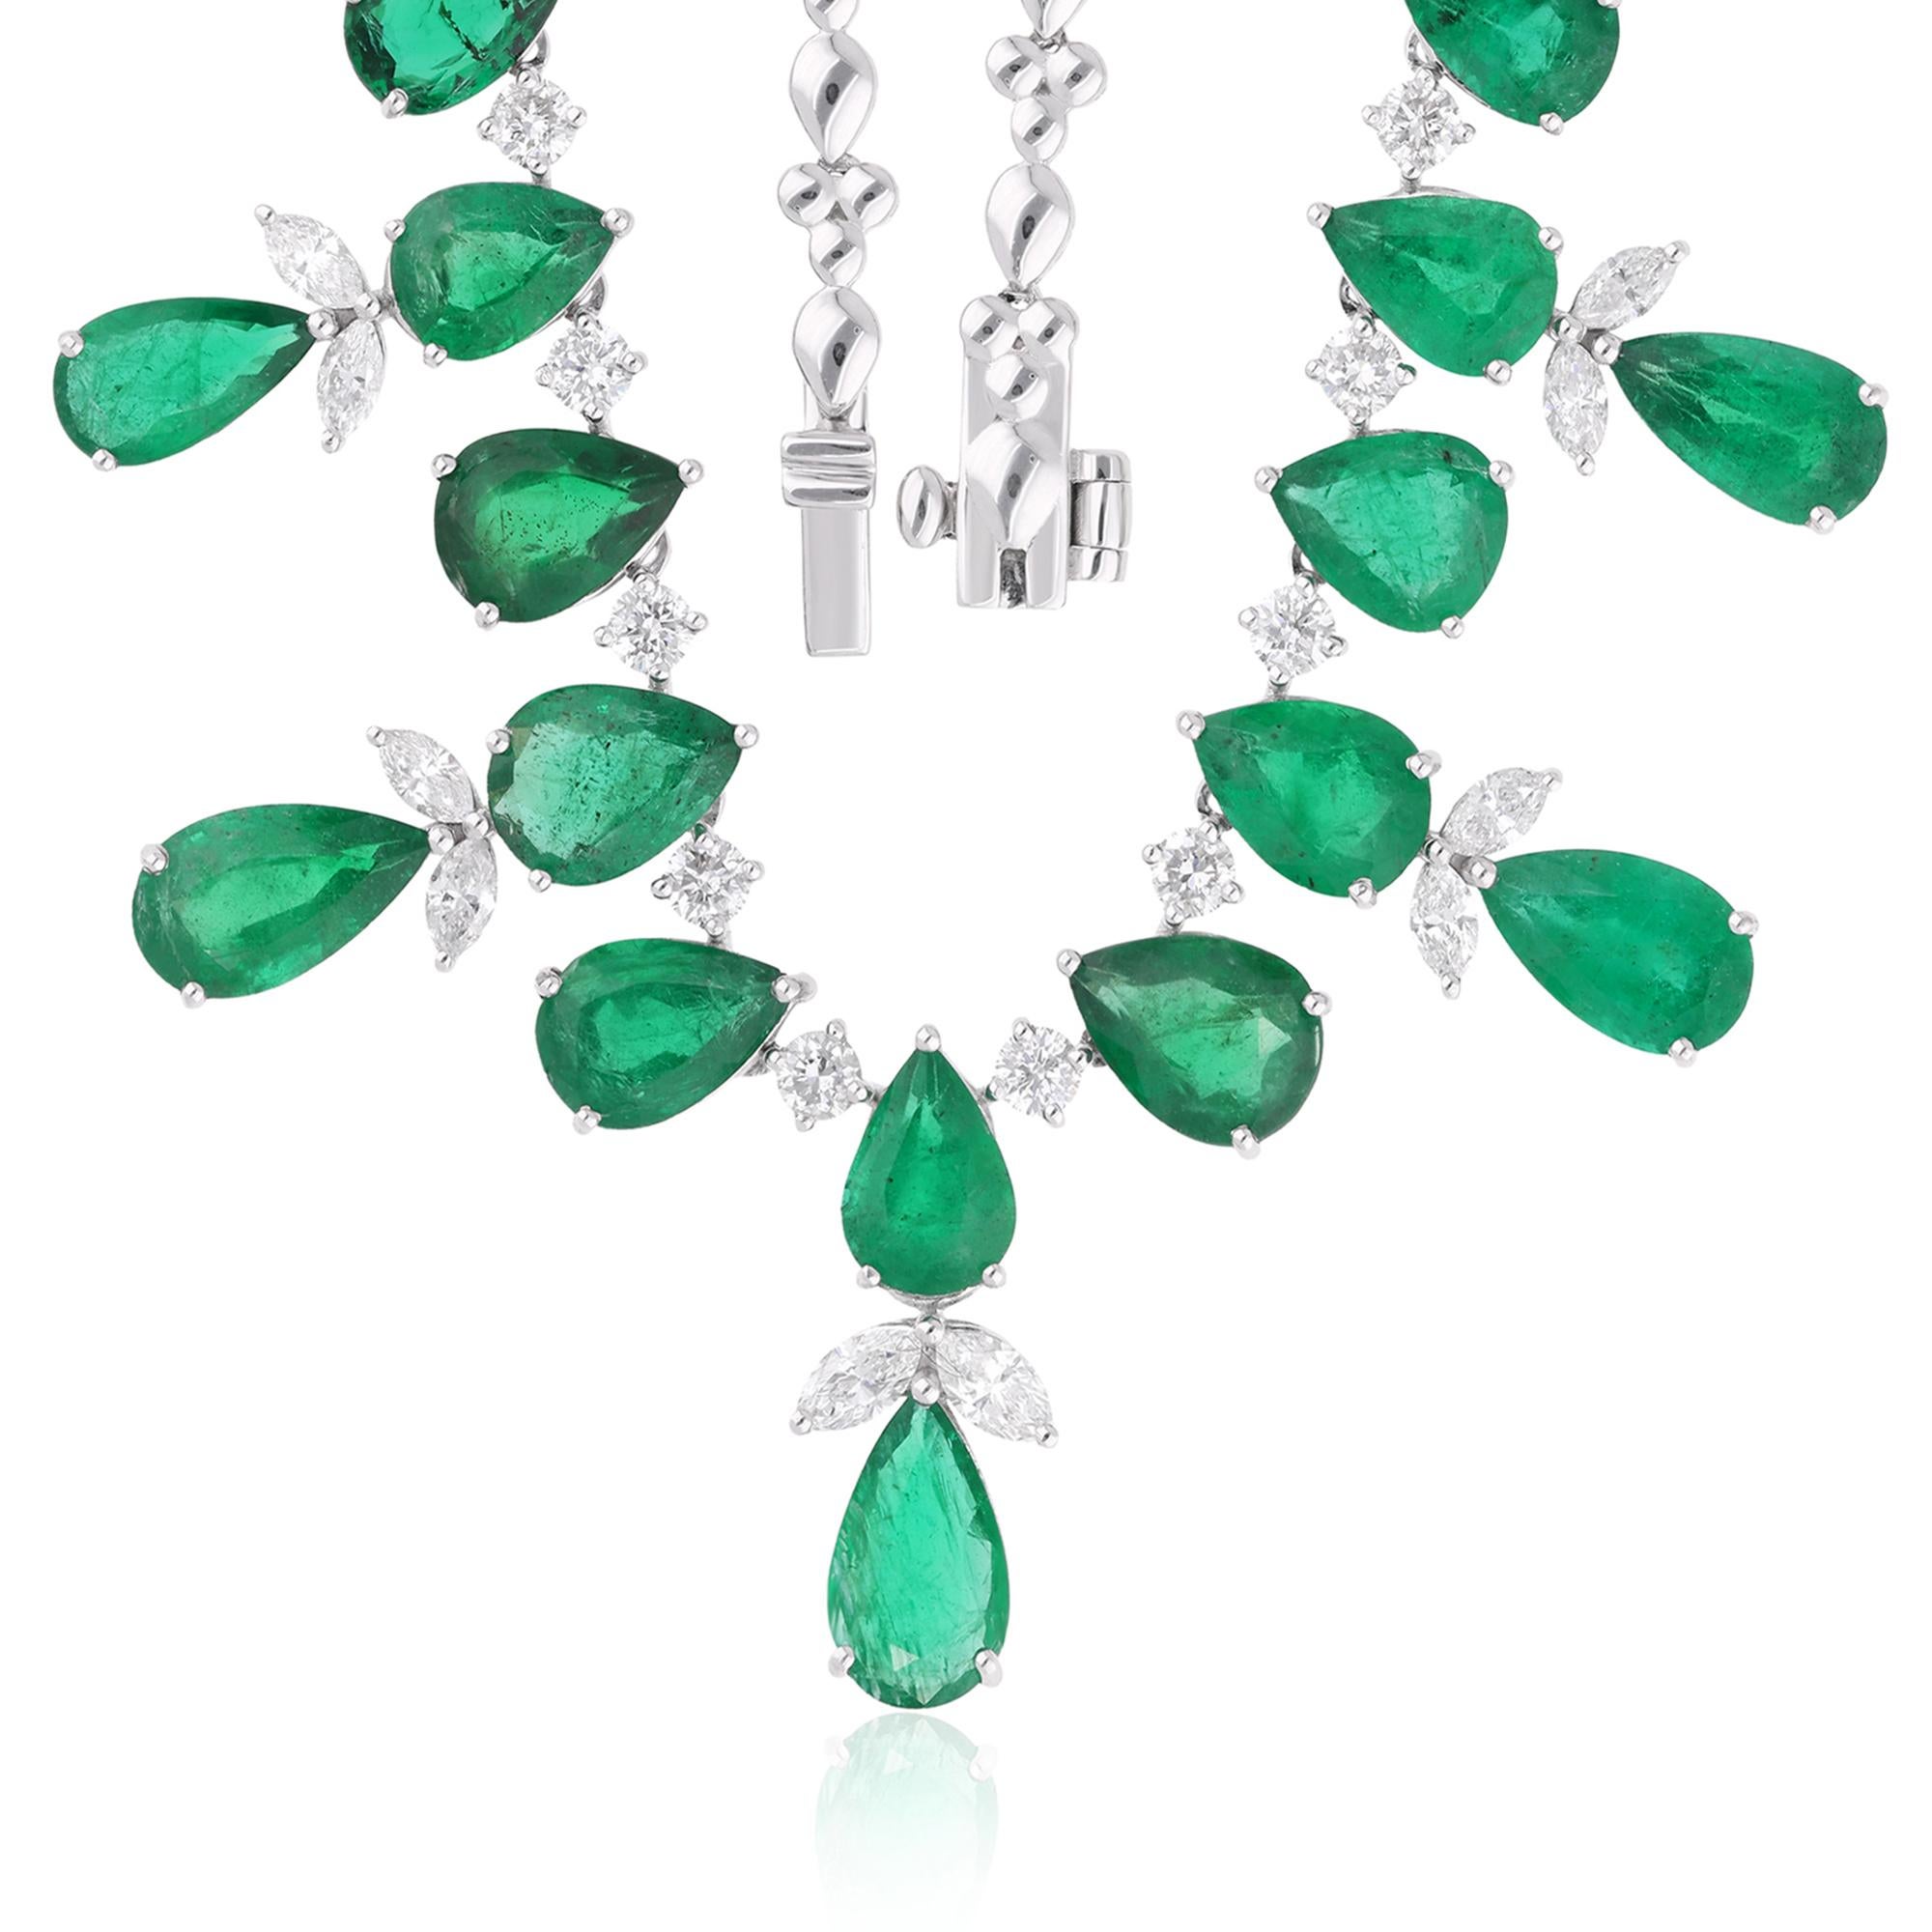 Embrace the enchanting allure of nature's finest with this exquisite necklace featuring a captivating pear-shaped Zambian emerald gemstone accented by round and pear-shaped diamonds, all set in luxurious 14 karat white gold. Designed to evoke a